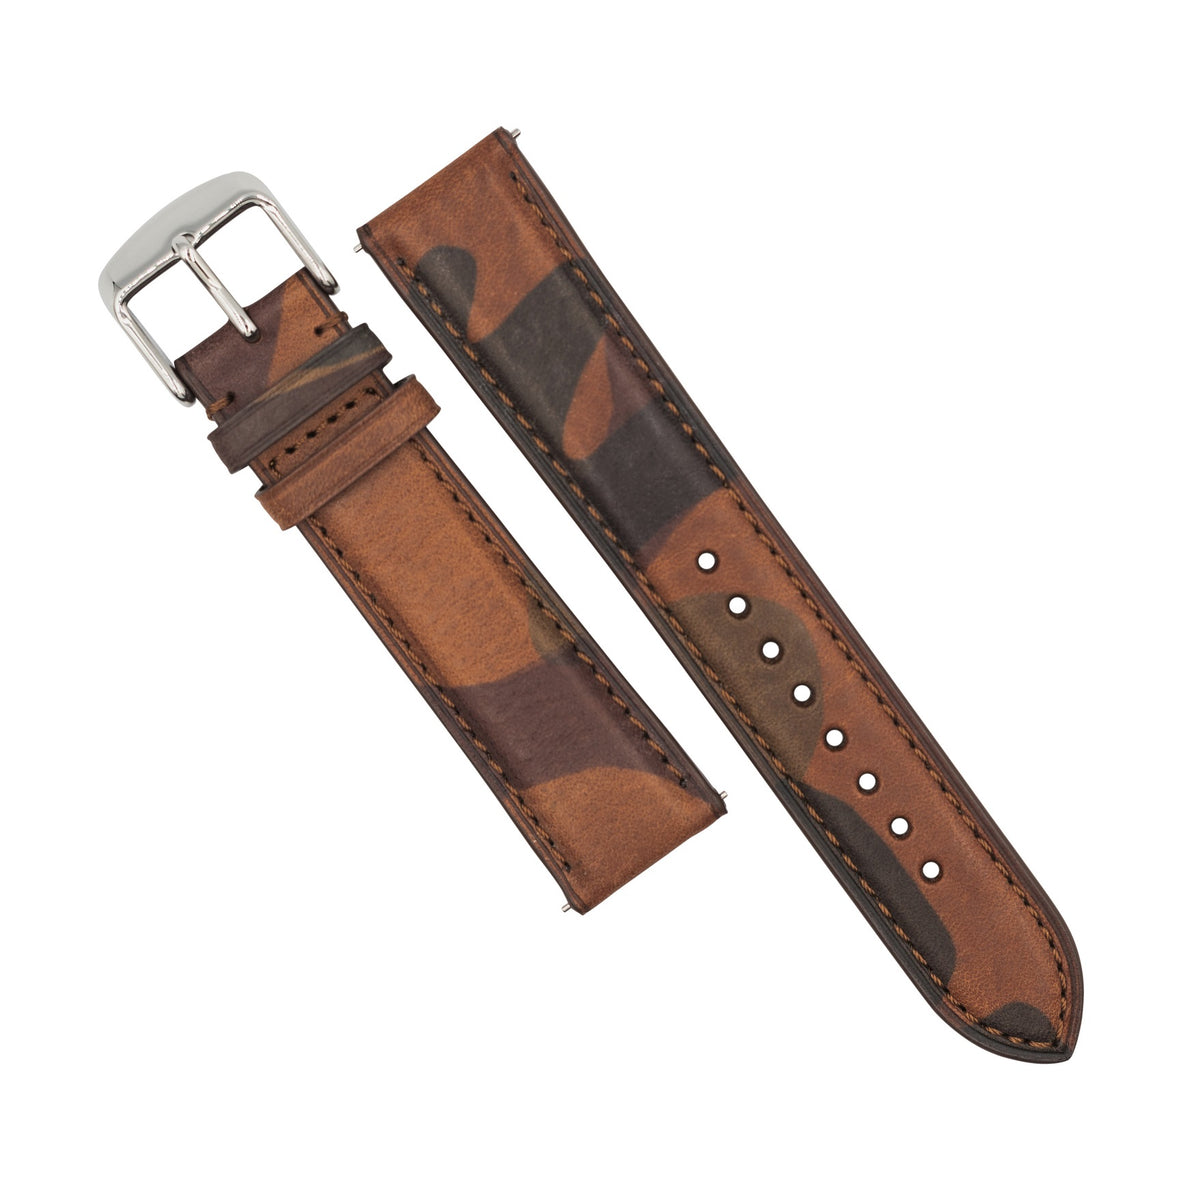 Emery Classic LPA Camo Leather Strap in Sand Camo (18mm) - Nomad Watch Works SG